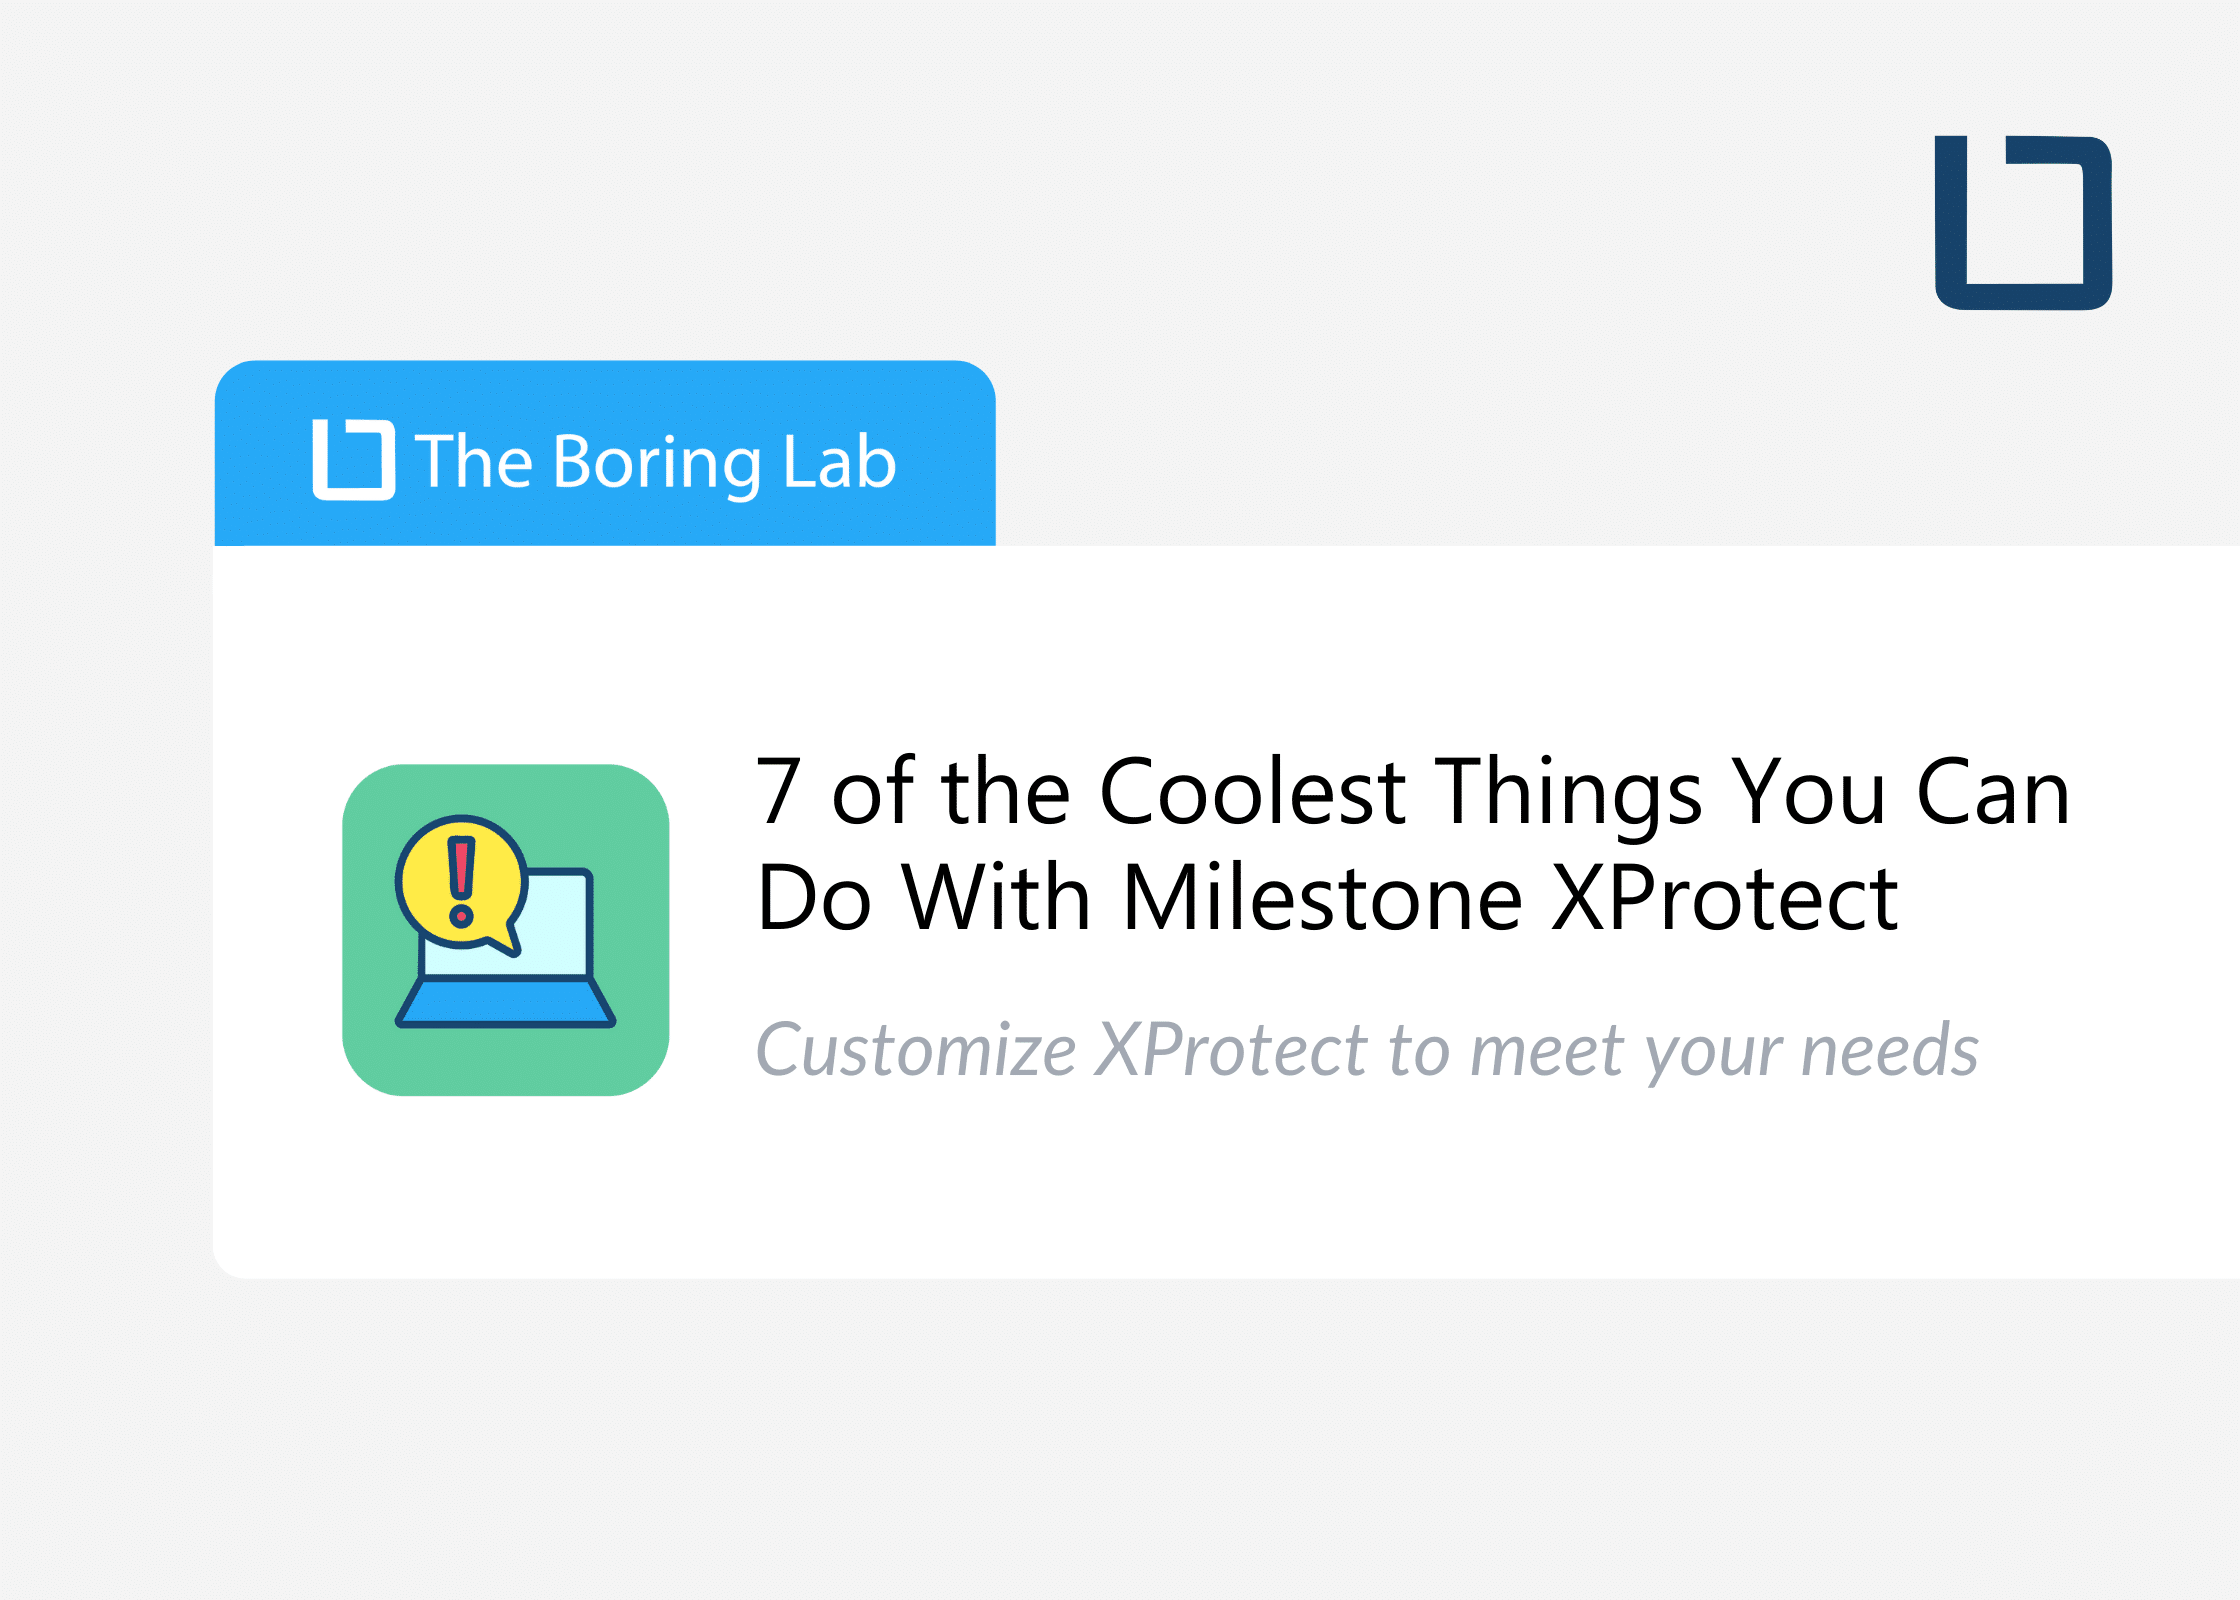 7 of the Coolest Things You Can Do With Milestone XProtect